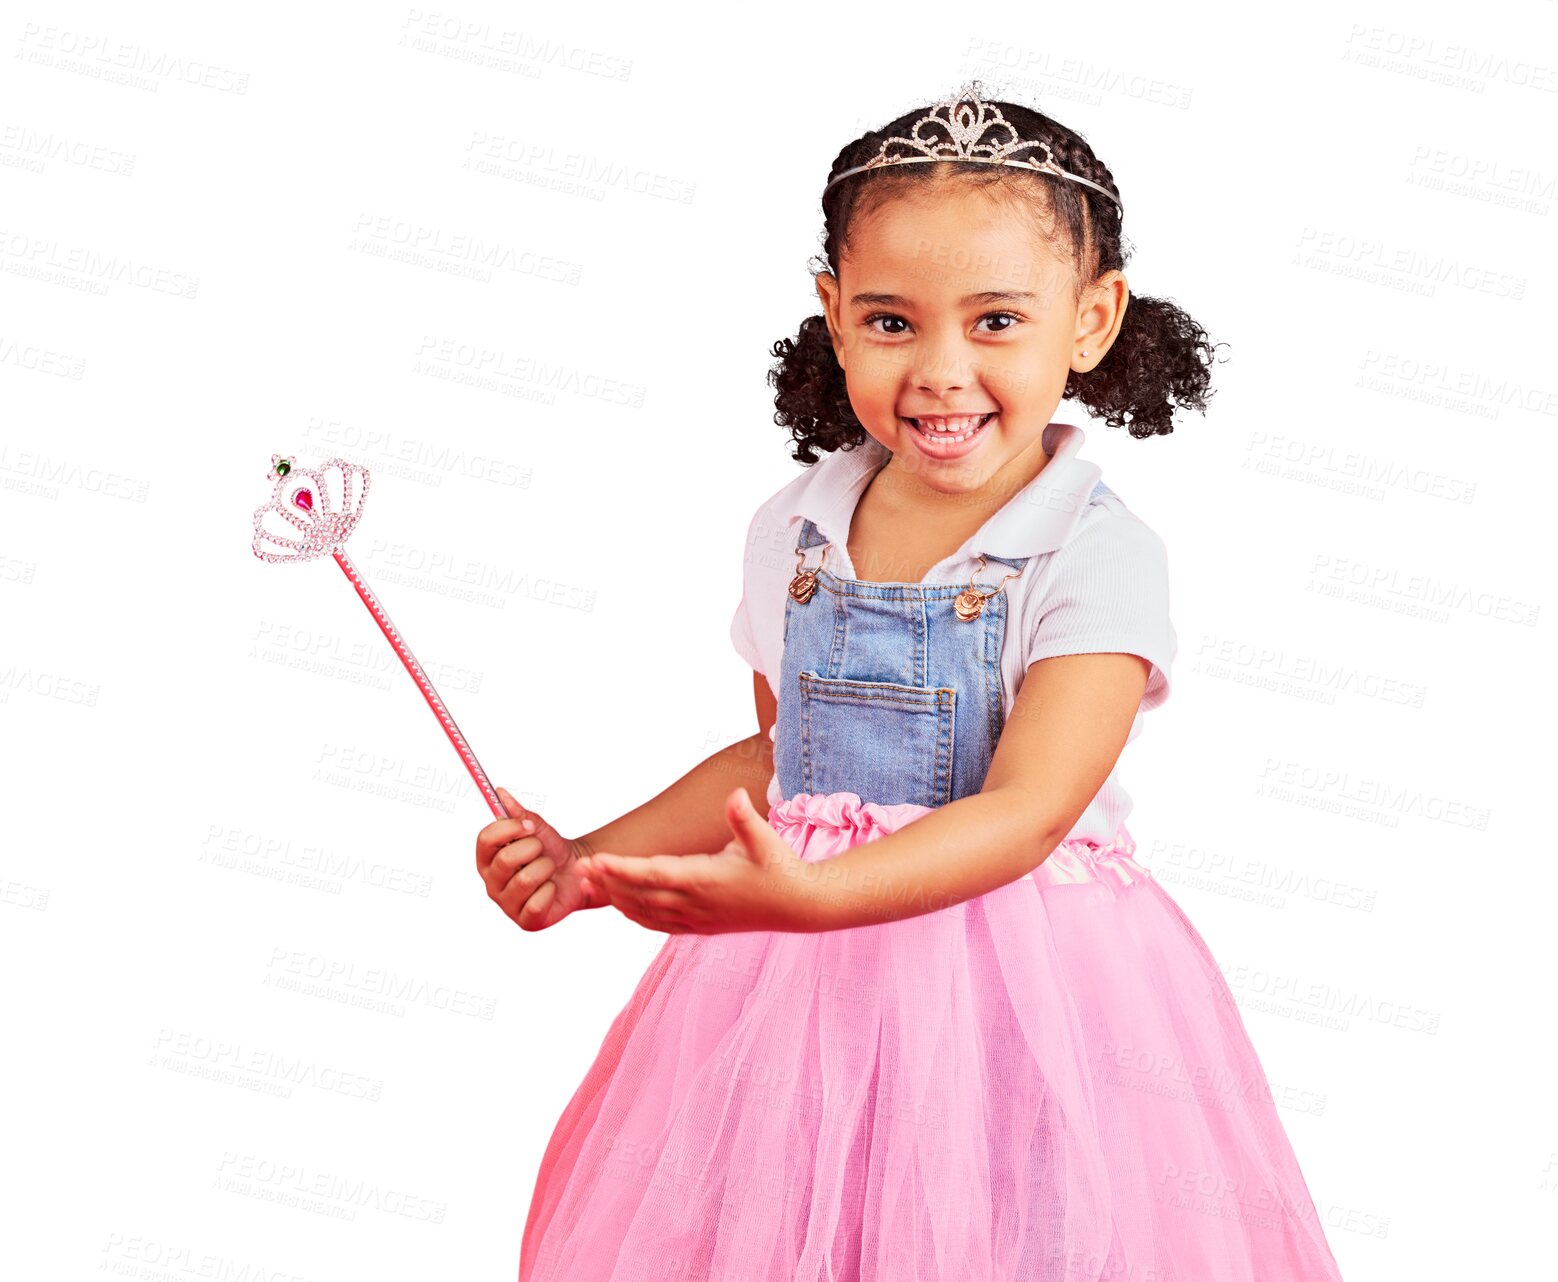 Buy stock photo Girl portrait, child and princess with magic wand, fantasy and  pink dress  isolated on transparent png background. Happy kid, fairytale clothes and fashion, crown and cosplay game in ballet skirt 